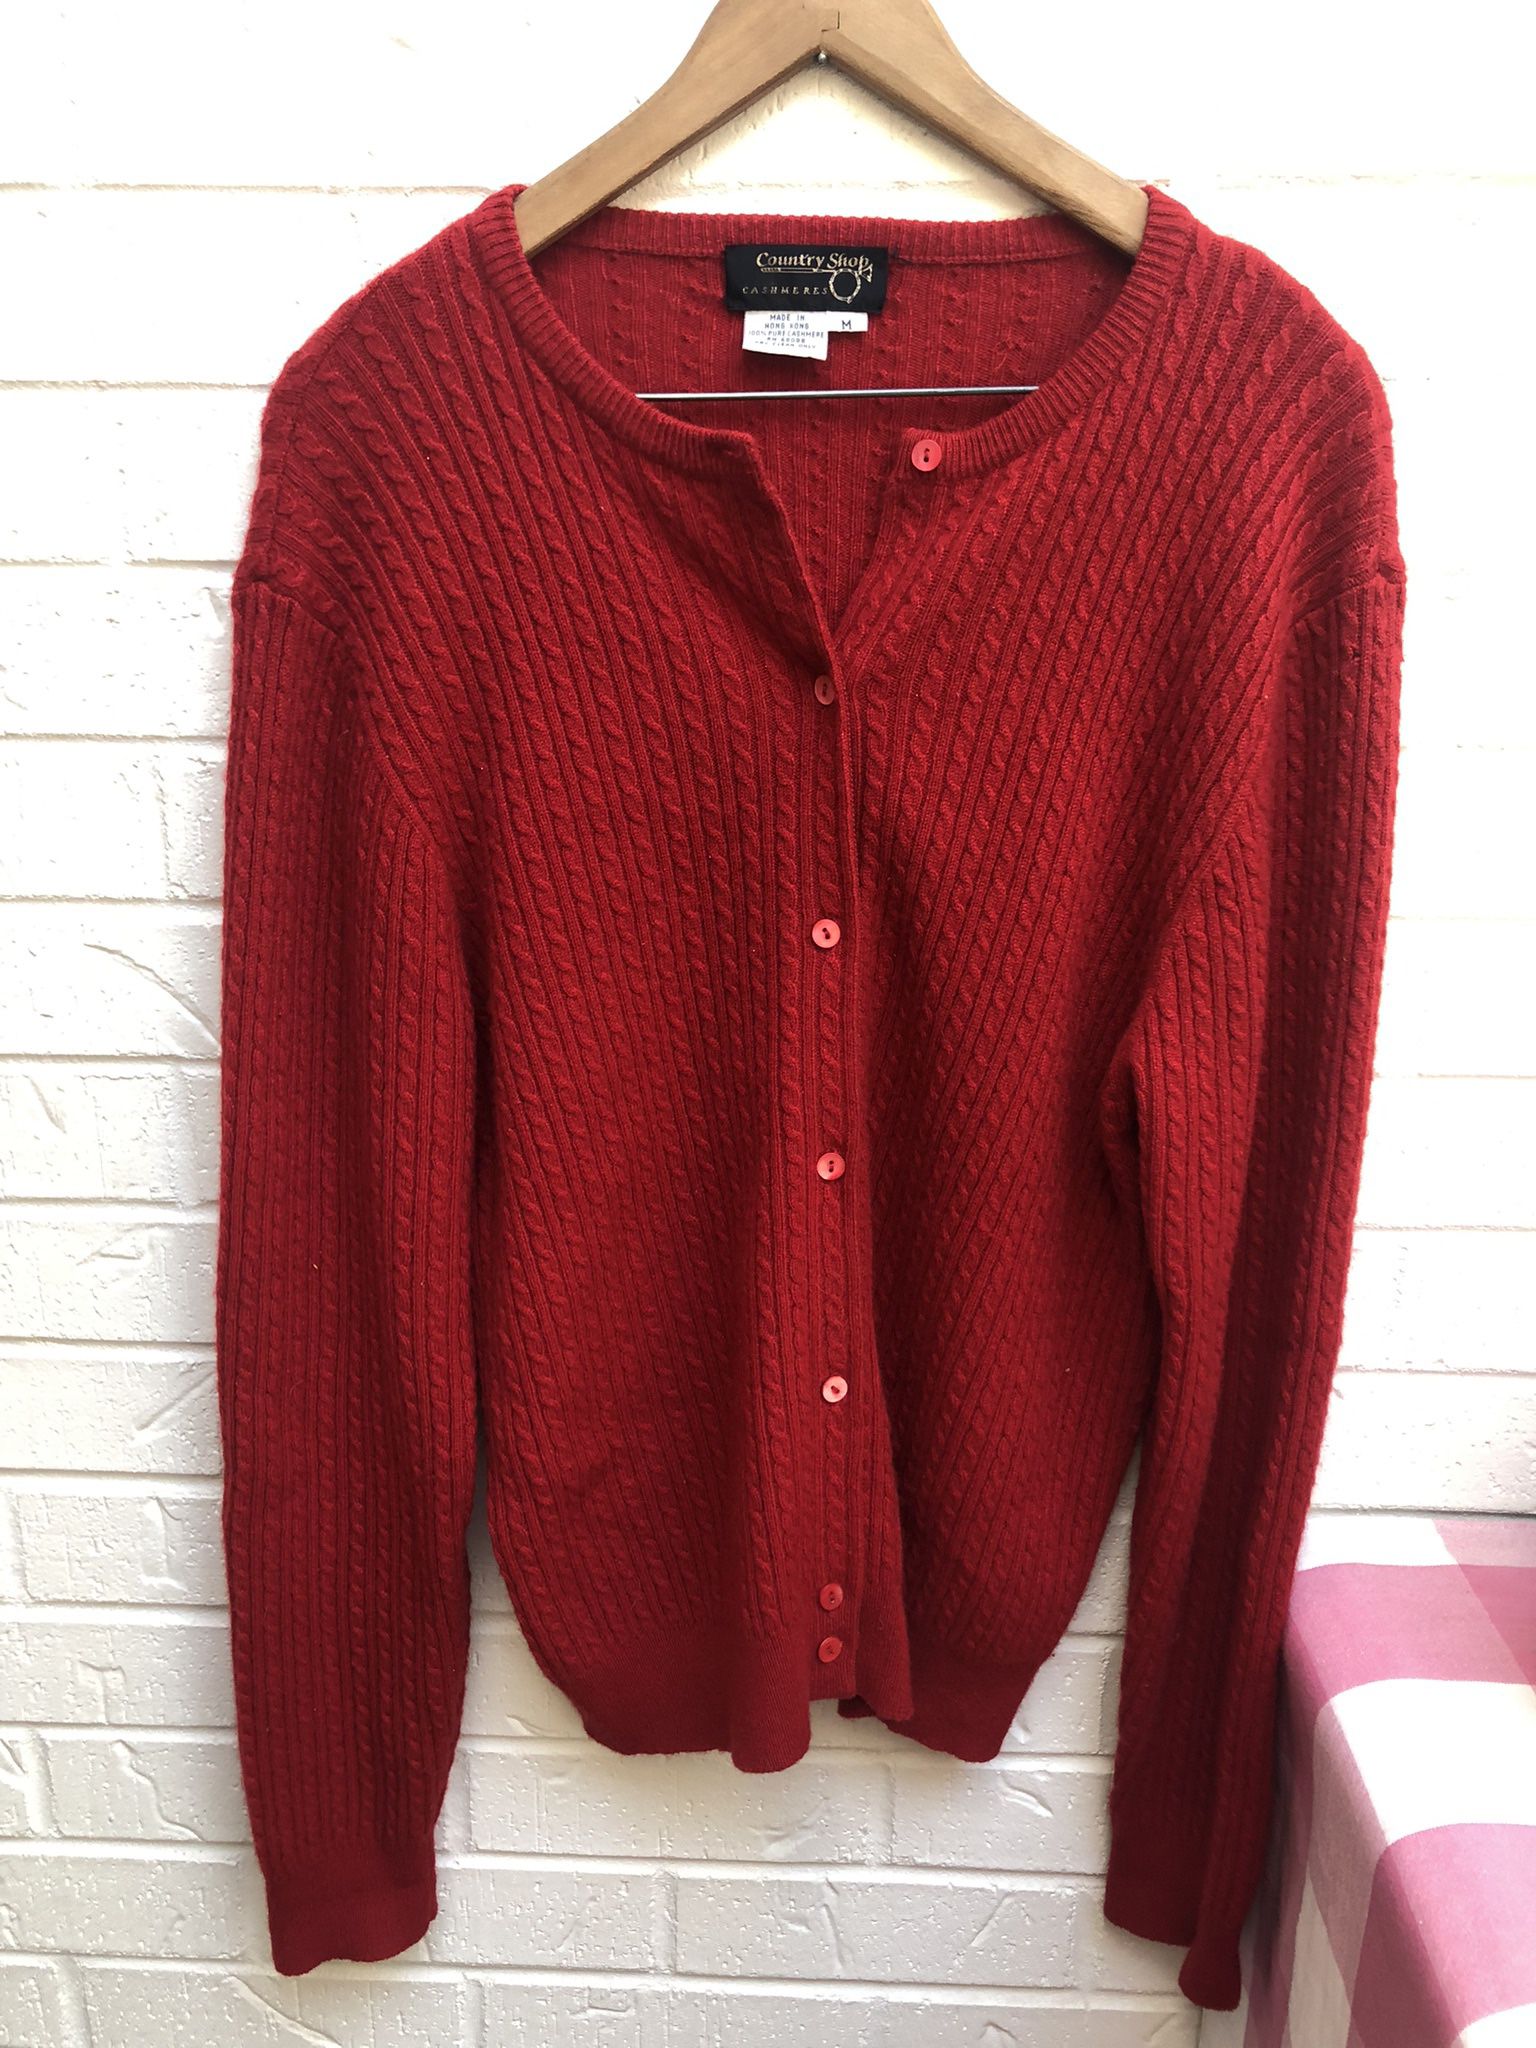 Country Shop Preowned Women’s Red Baby Cable Stitch Cardigan Size M